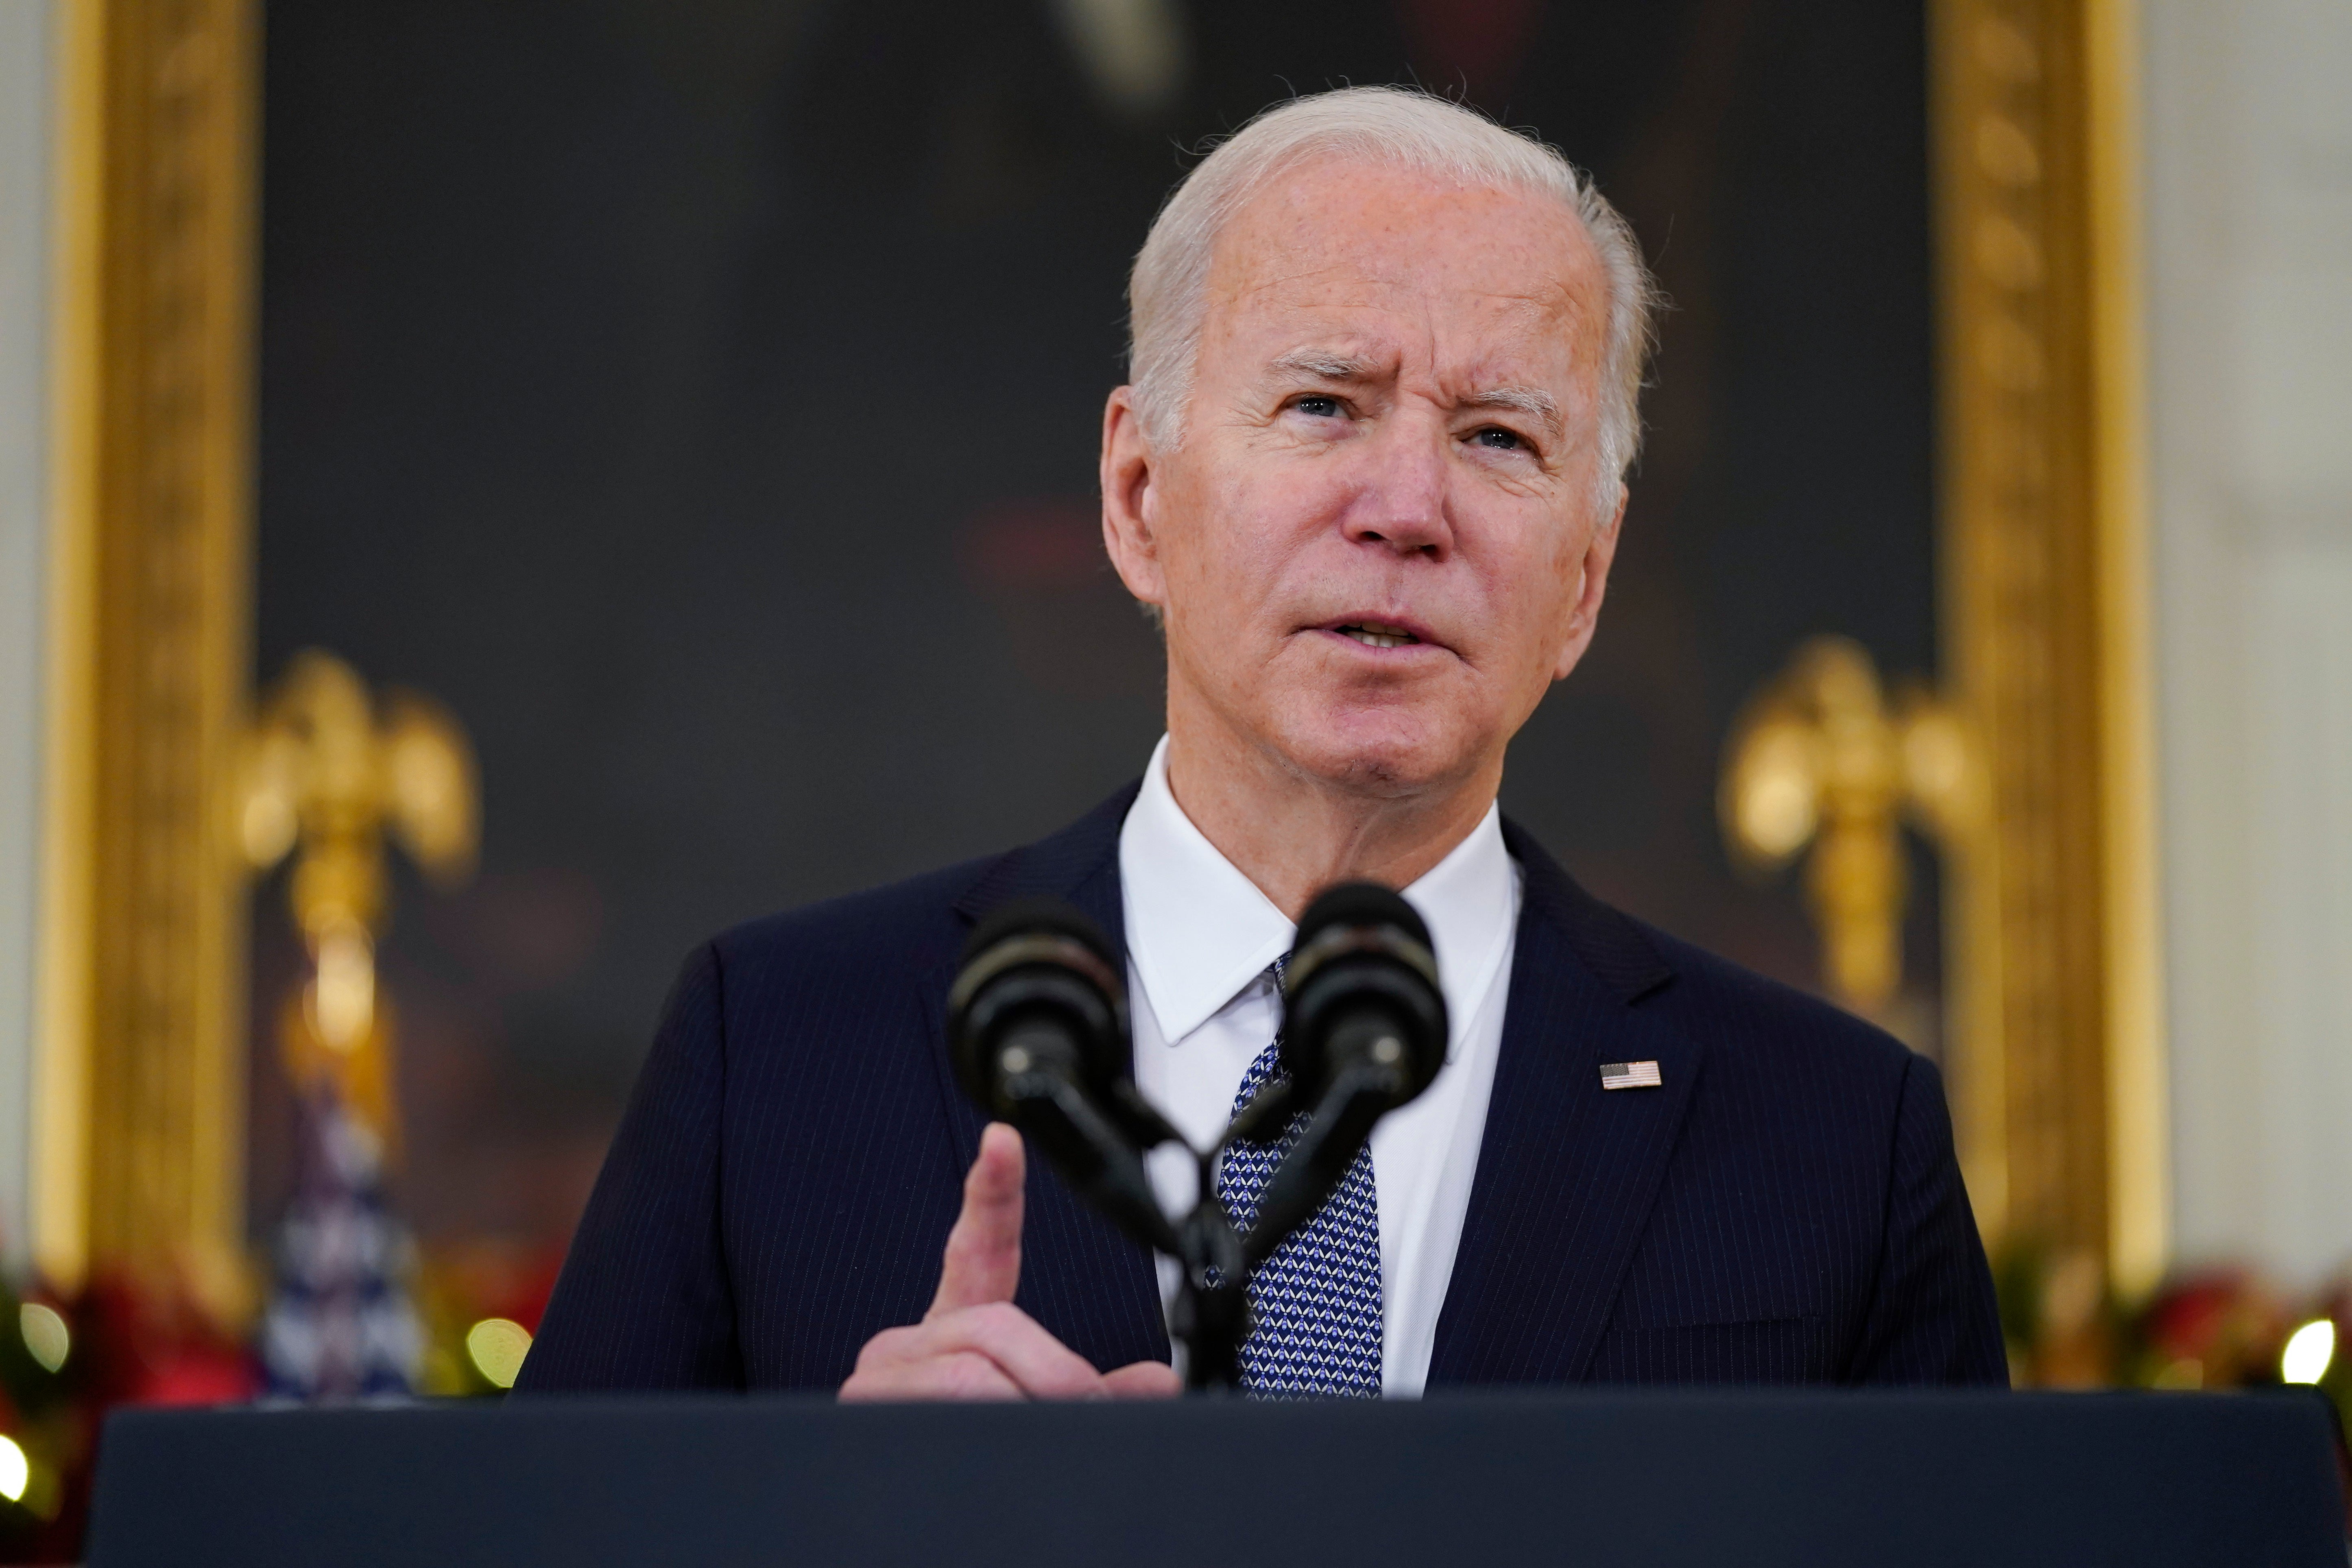 US president Joe Biden, in November, had indicated he was considering a diplomatic boycott of the games